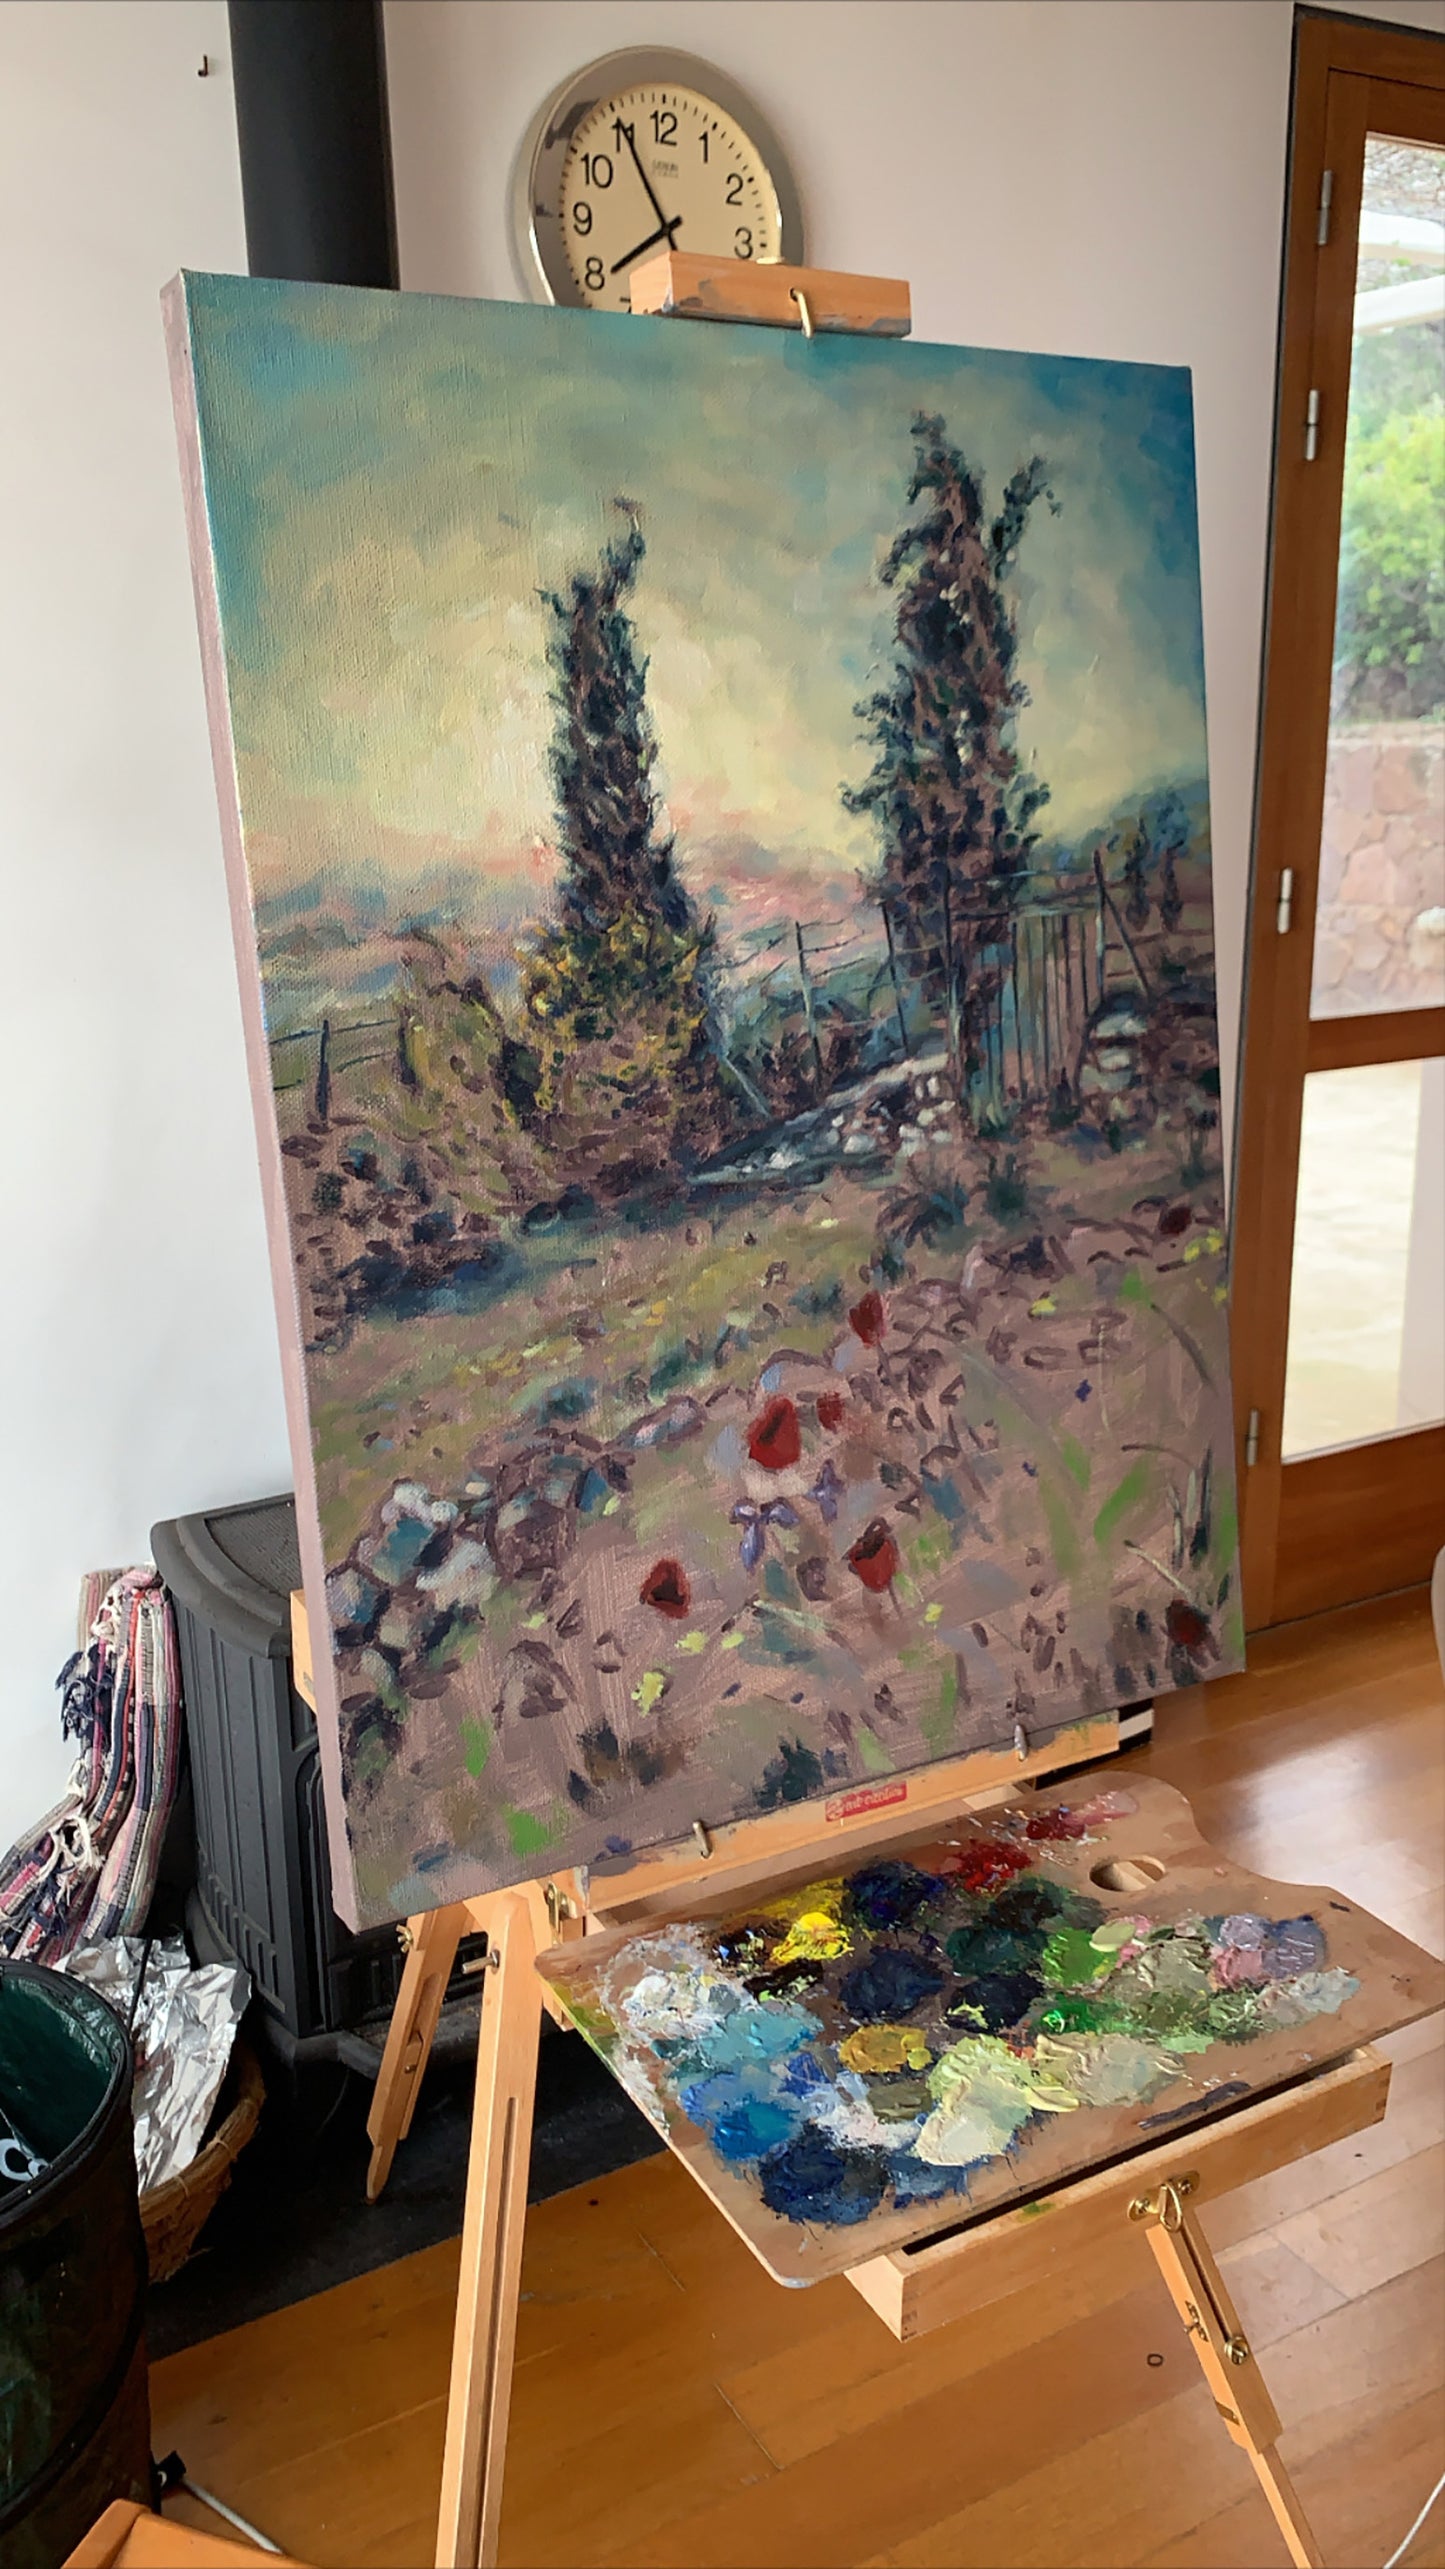 Original Painting: Two Cypresses with Spring Wildflowers in Tzikides Aegina